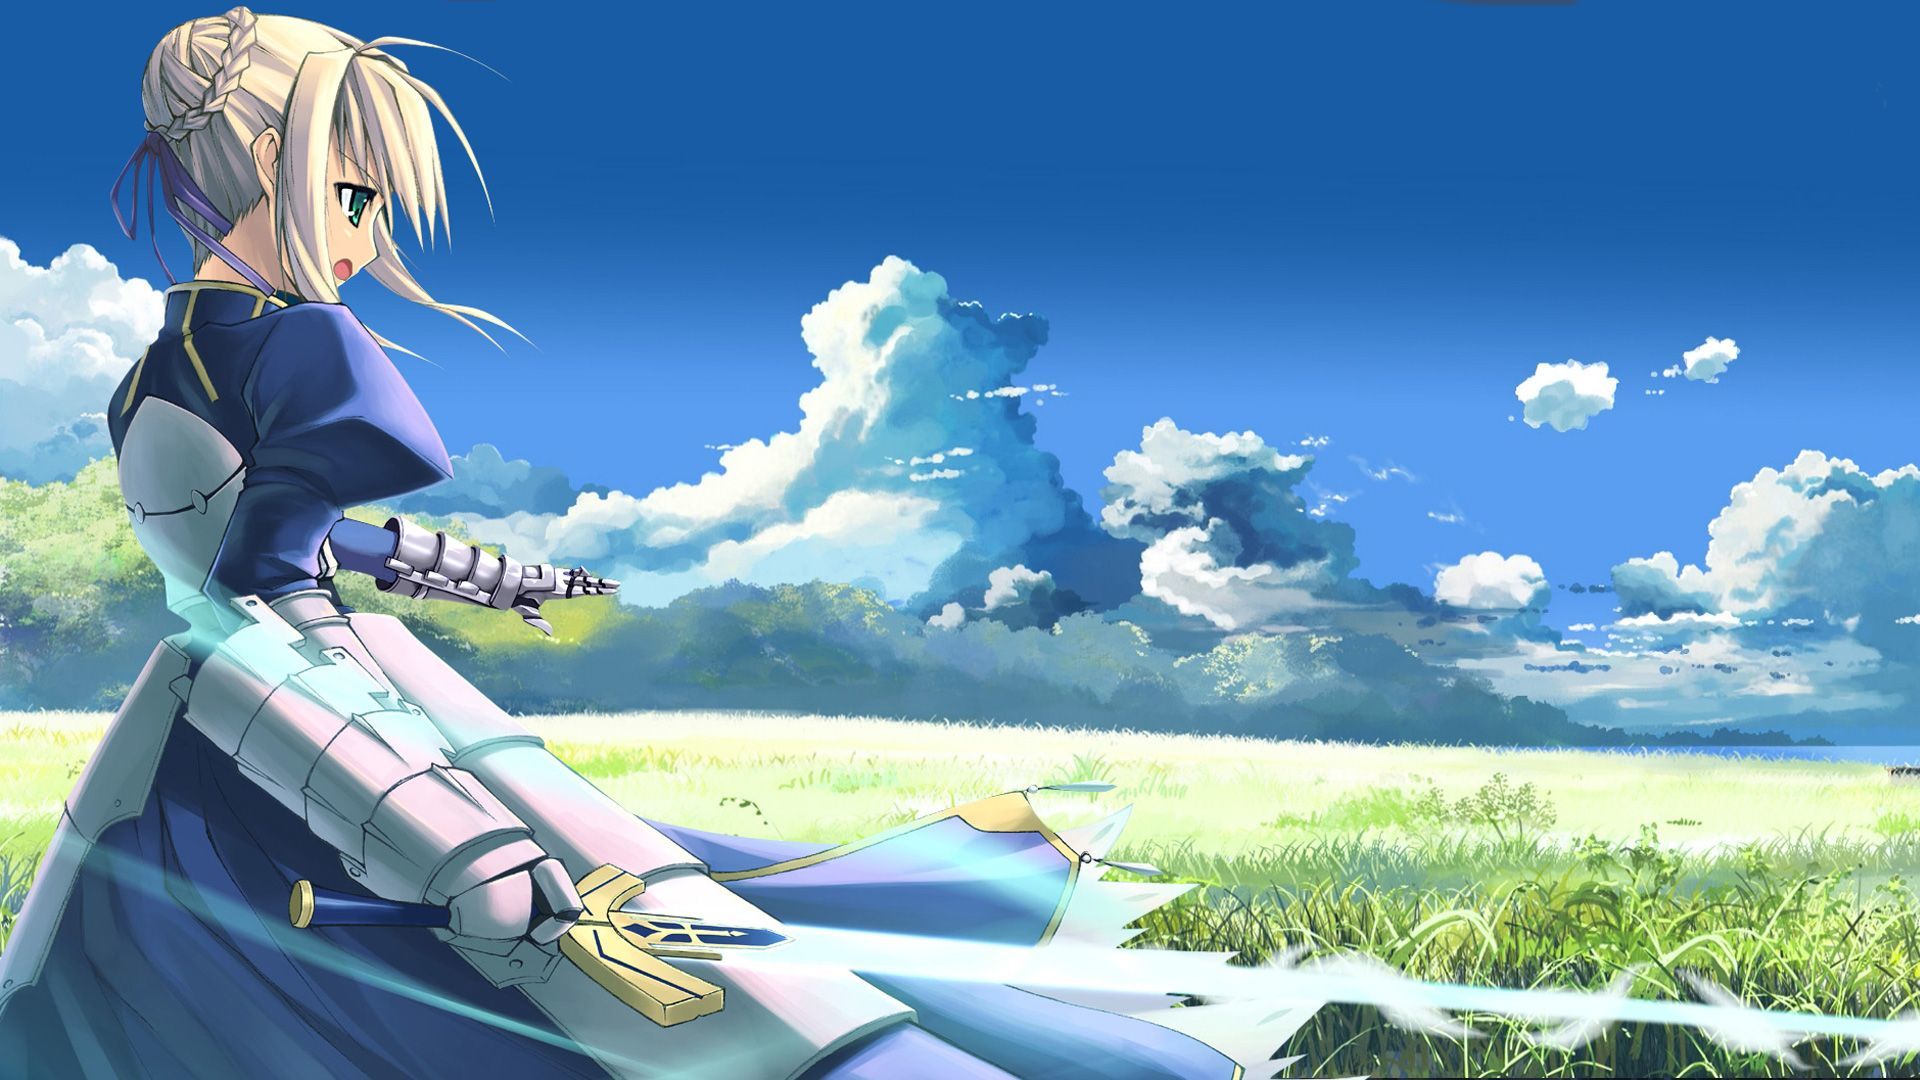 Free download Saber Fatestay night Wallpaper 25694 [for